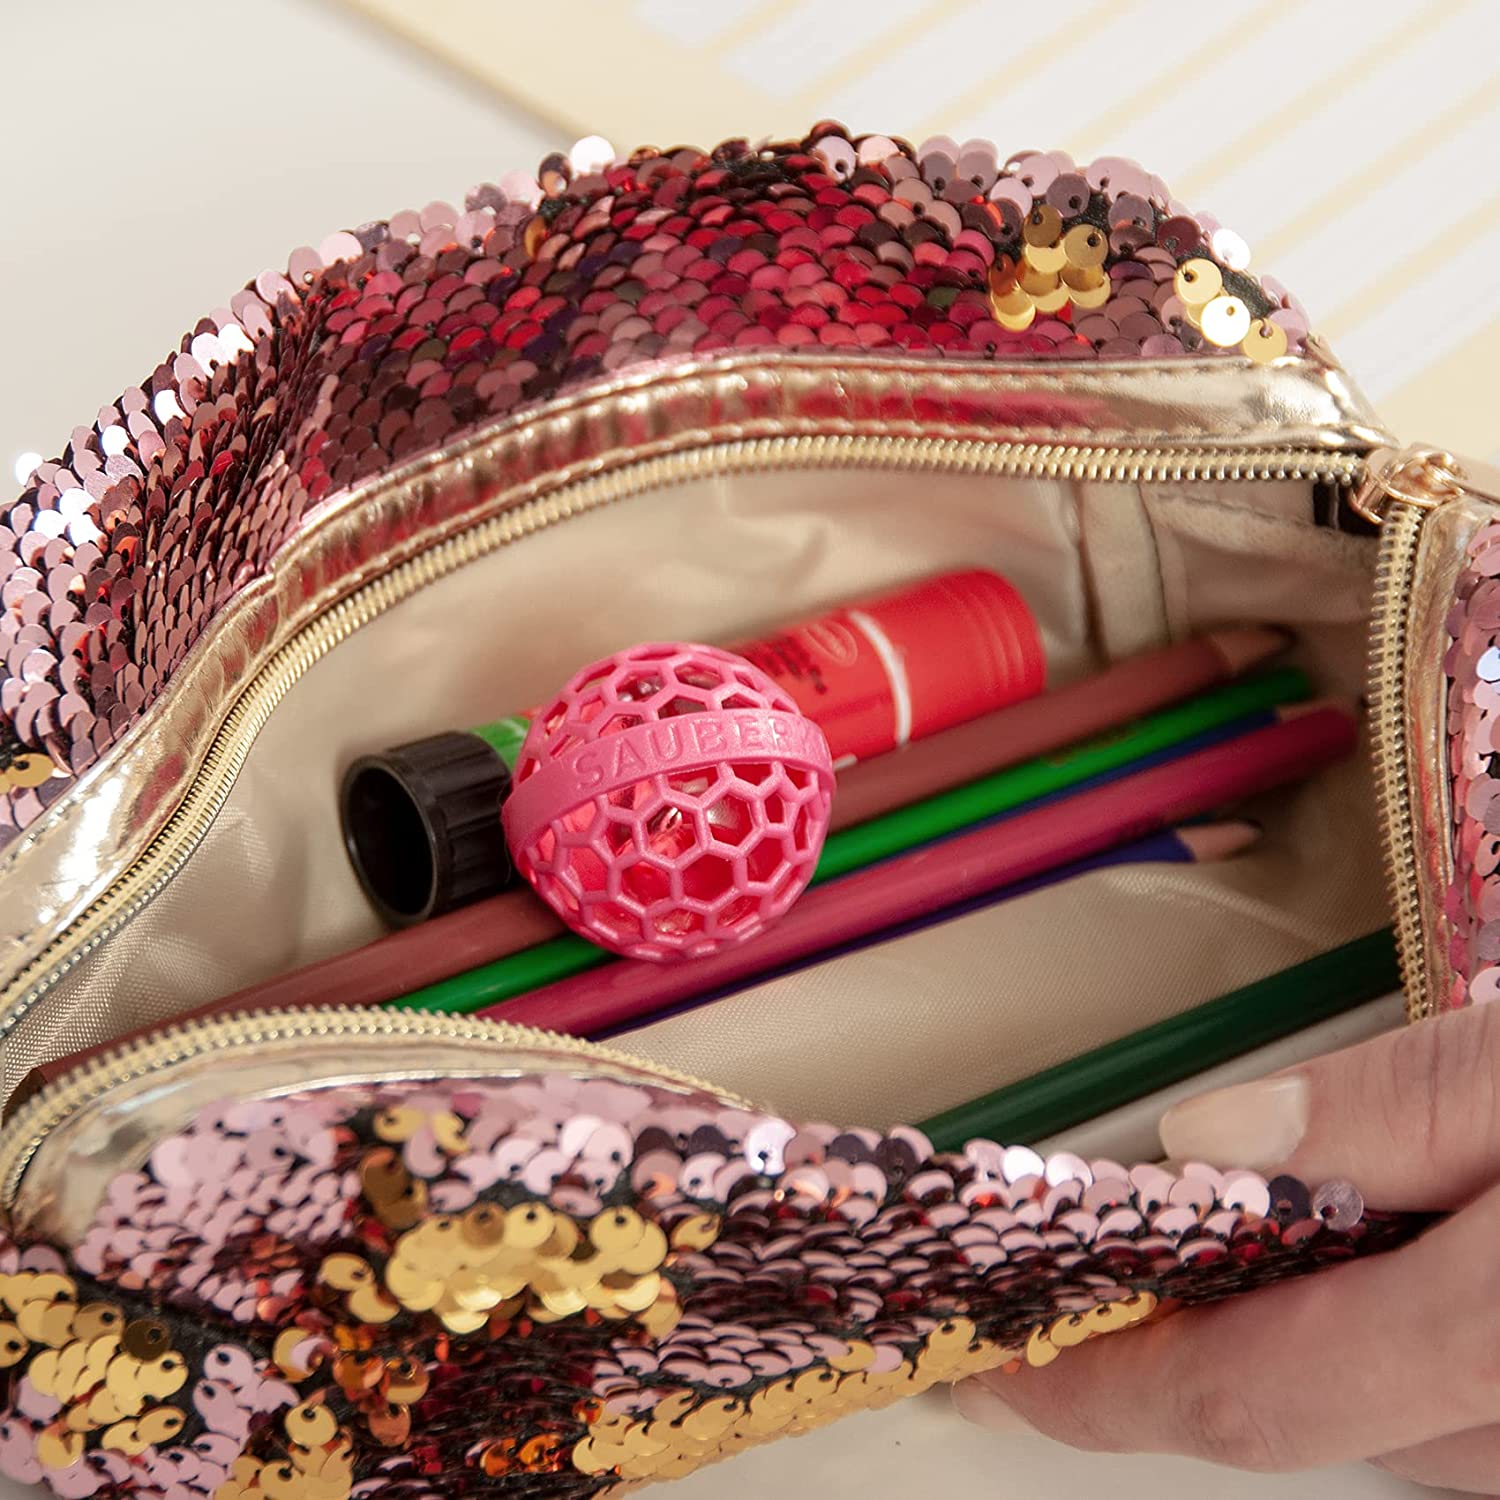 The Clean Ball - Keep your Bags Clean - Sticky Inside Ball Picks up Dust, Dirt and Crumbs in your Purse, Bag, Or Backpacks